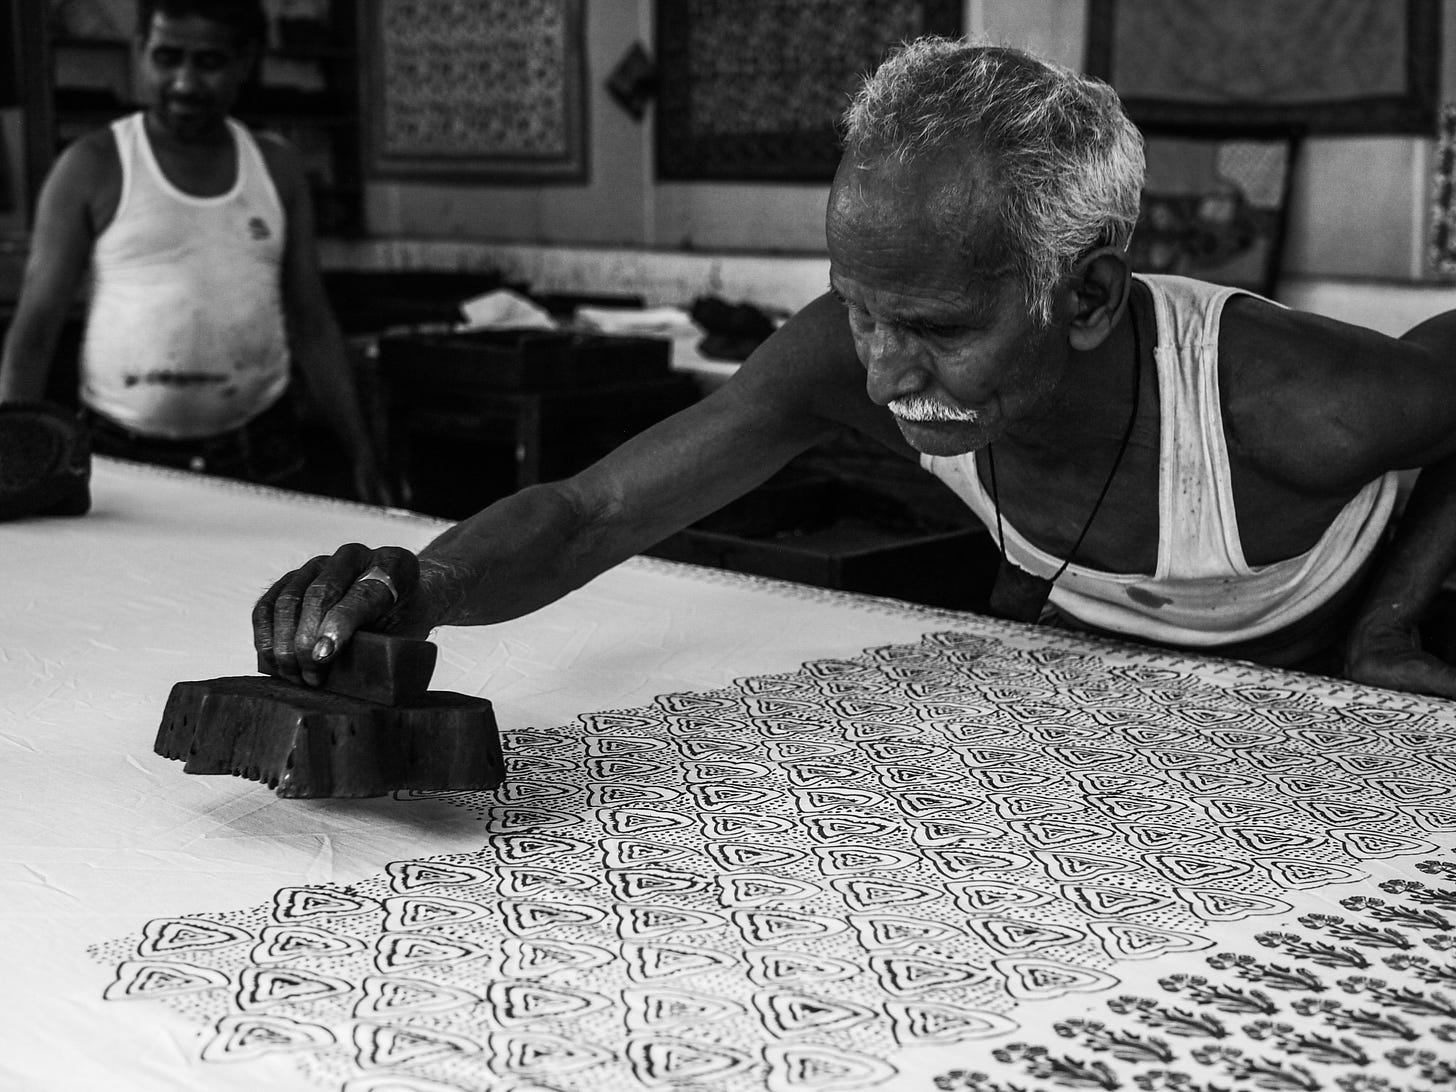 Man stamping repeating patterns on a white surface